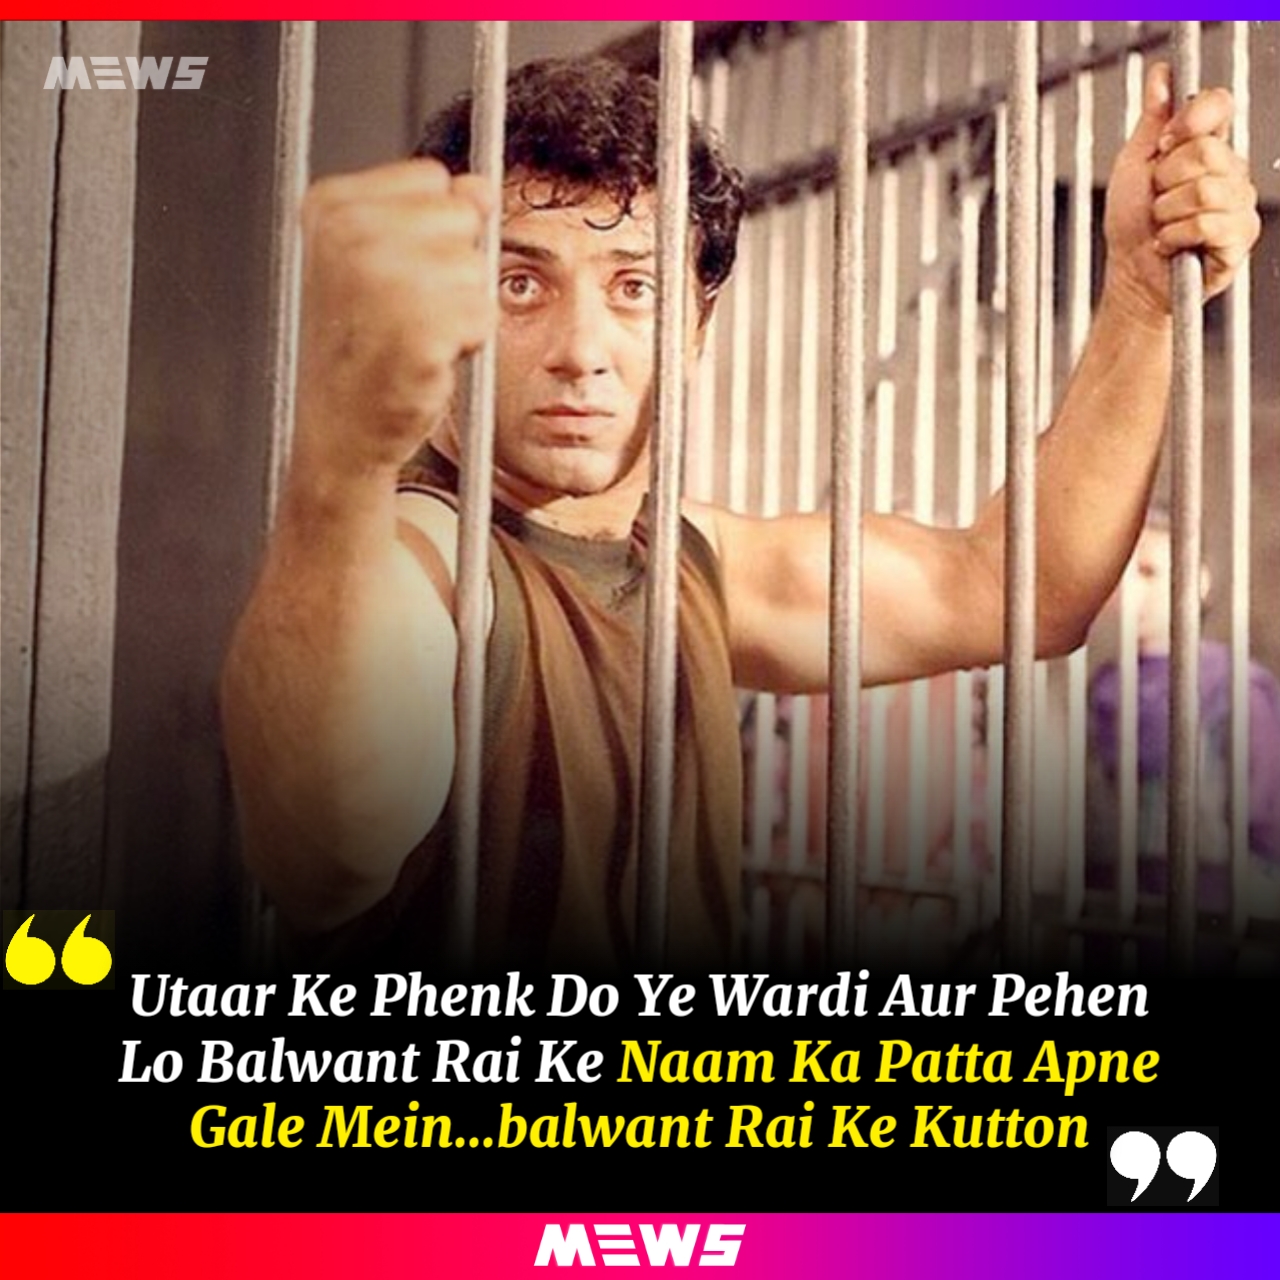 famous dialogues of Bollywood